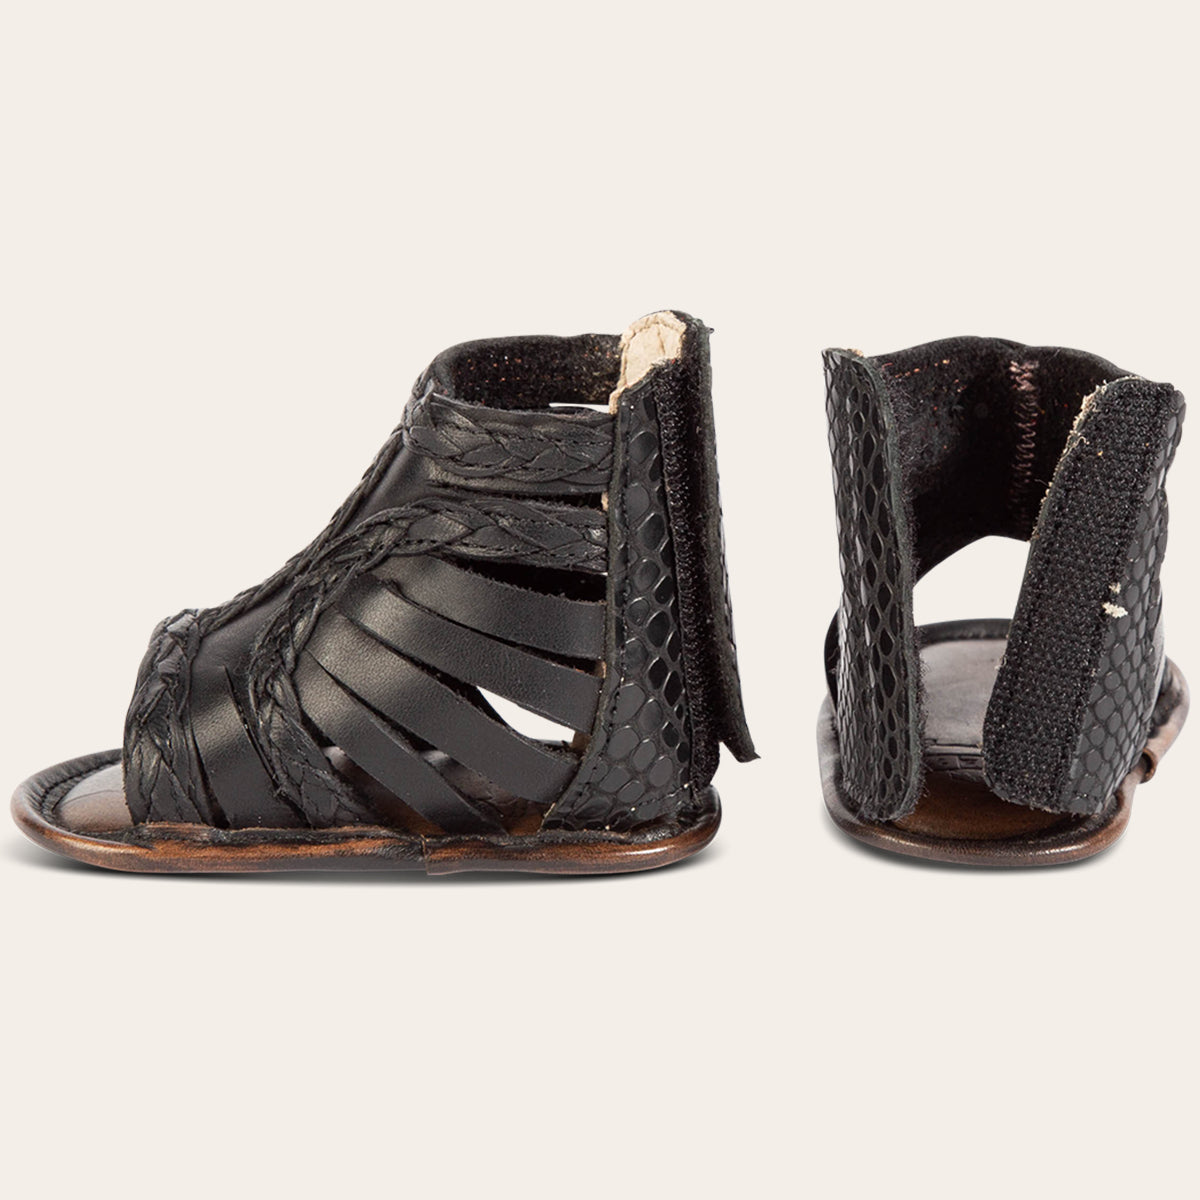 side and back view showing laser-cut leather, braided accents and embossed leather back velcro panel on FREEBIRD infant baby bela black leather sandal